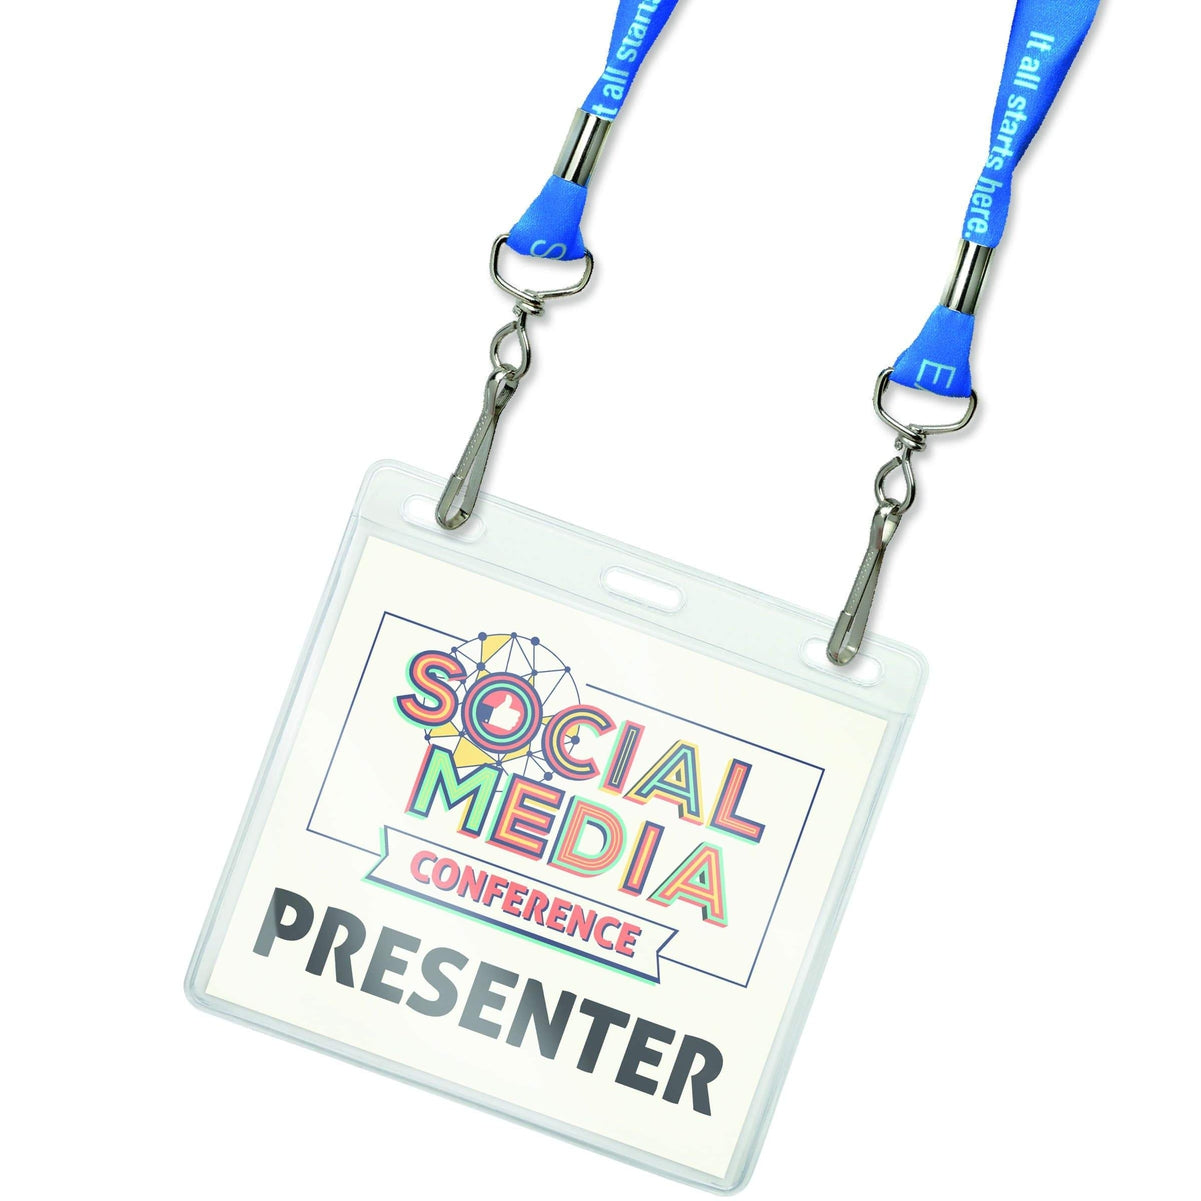 4x3 Badge Holder with Extra Room (4 1/4 x 3 3/4) for Laminated or Larger Credentials - Clear Vinyl Horizontal Event Badge Holder (1840-1618)